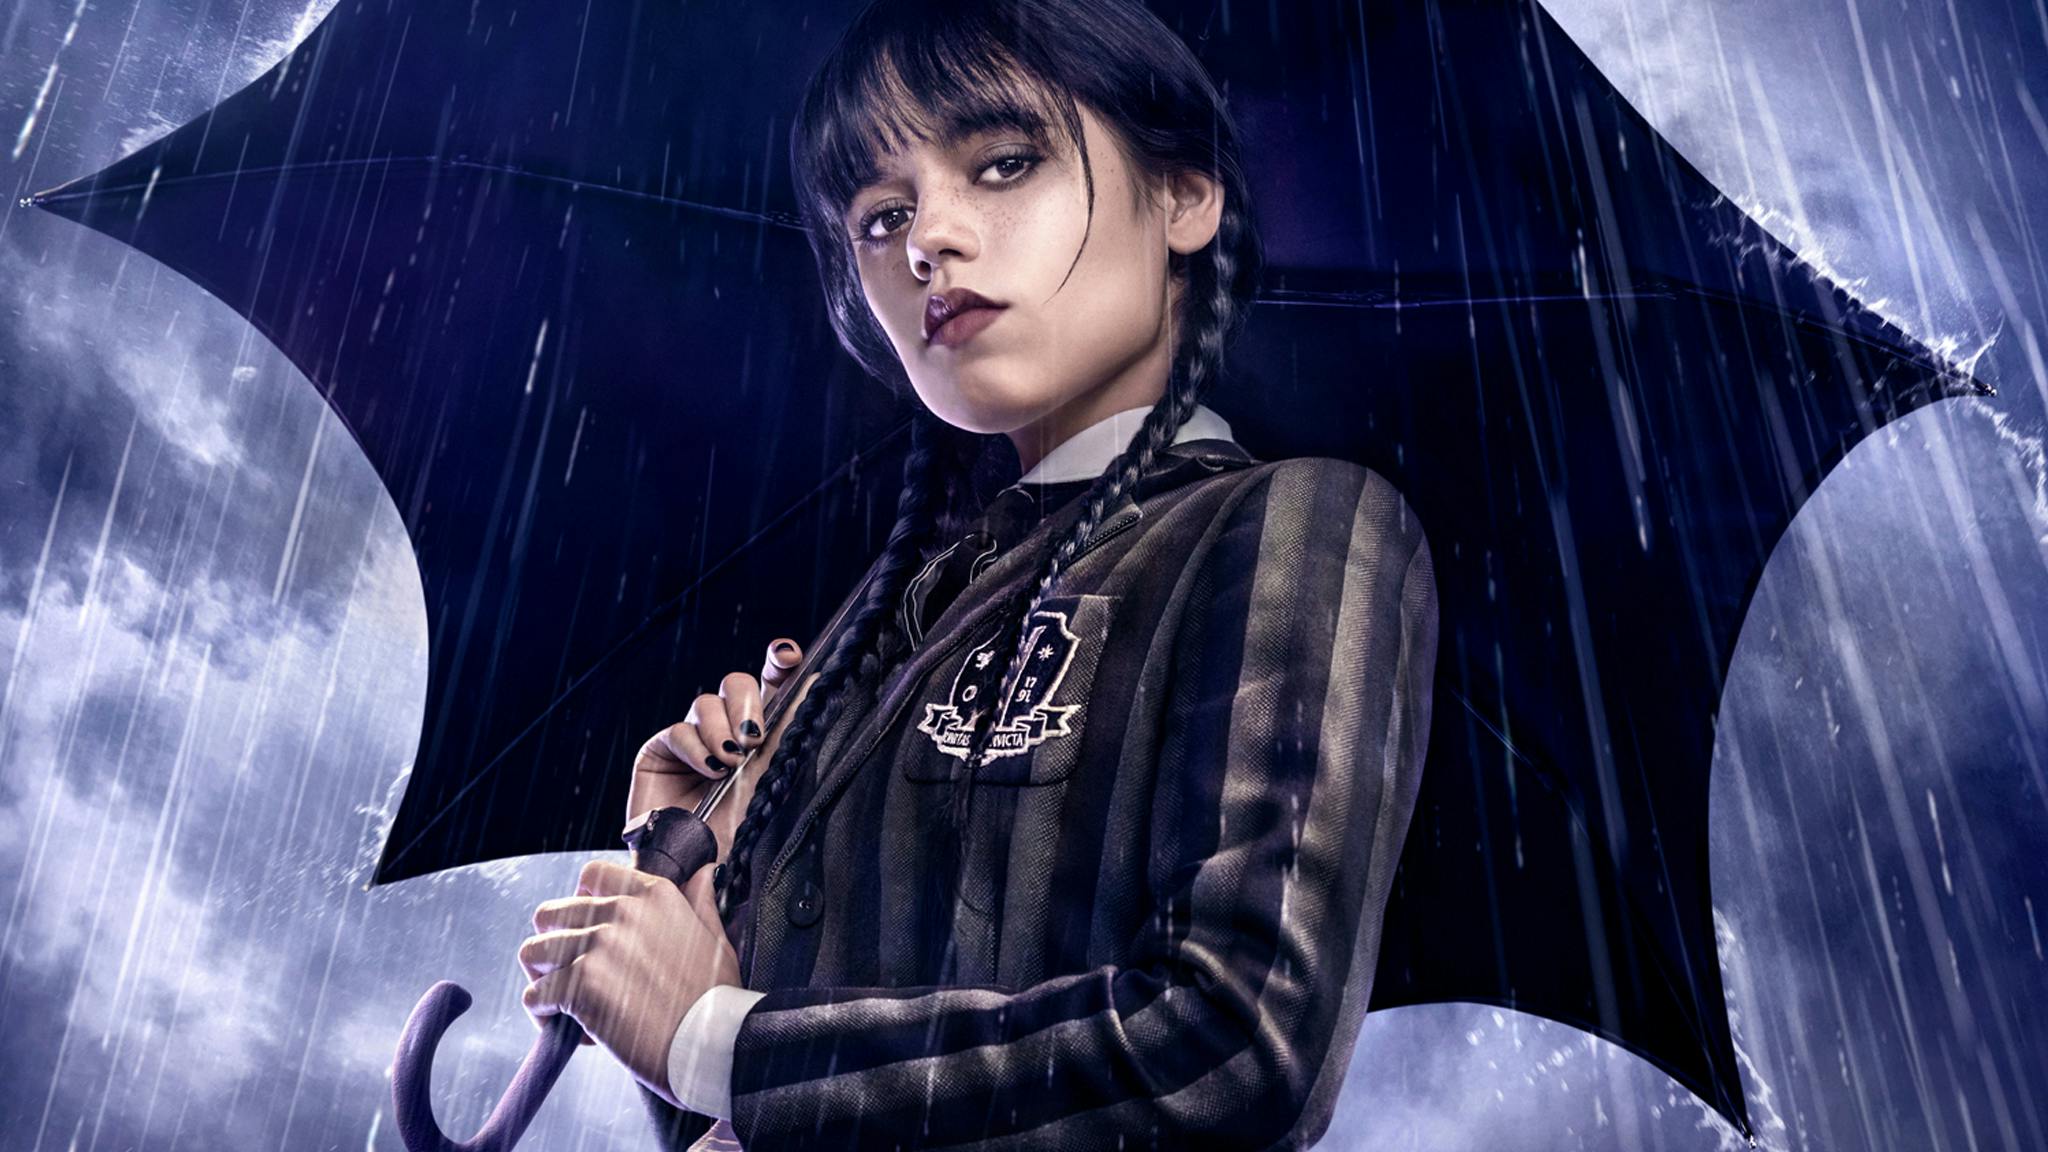 Director Tim Burton explains how he relates to “classic outsider” Wednesday Addams